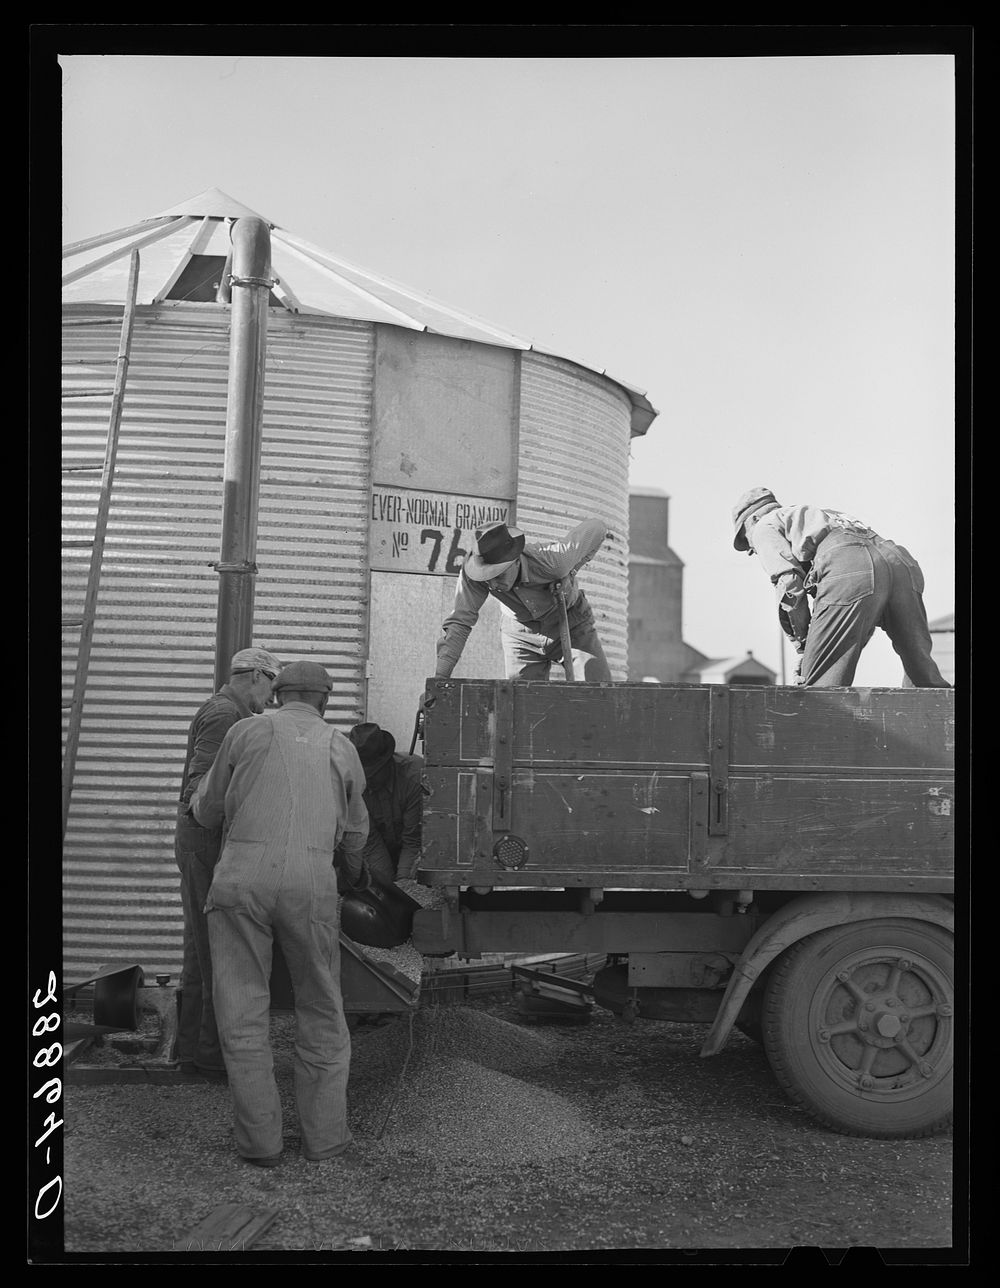 Storing corn in ever-normal granary bins. Grundy Center, Iowa. Sourced from the Library of Congress.